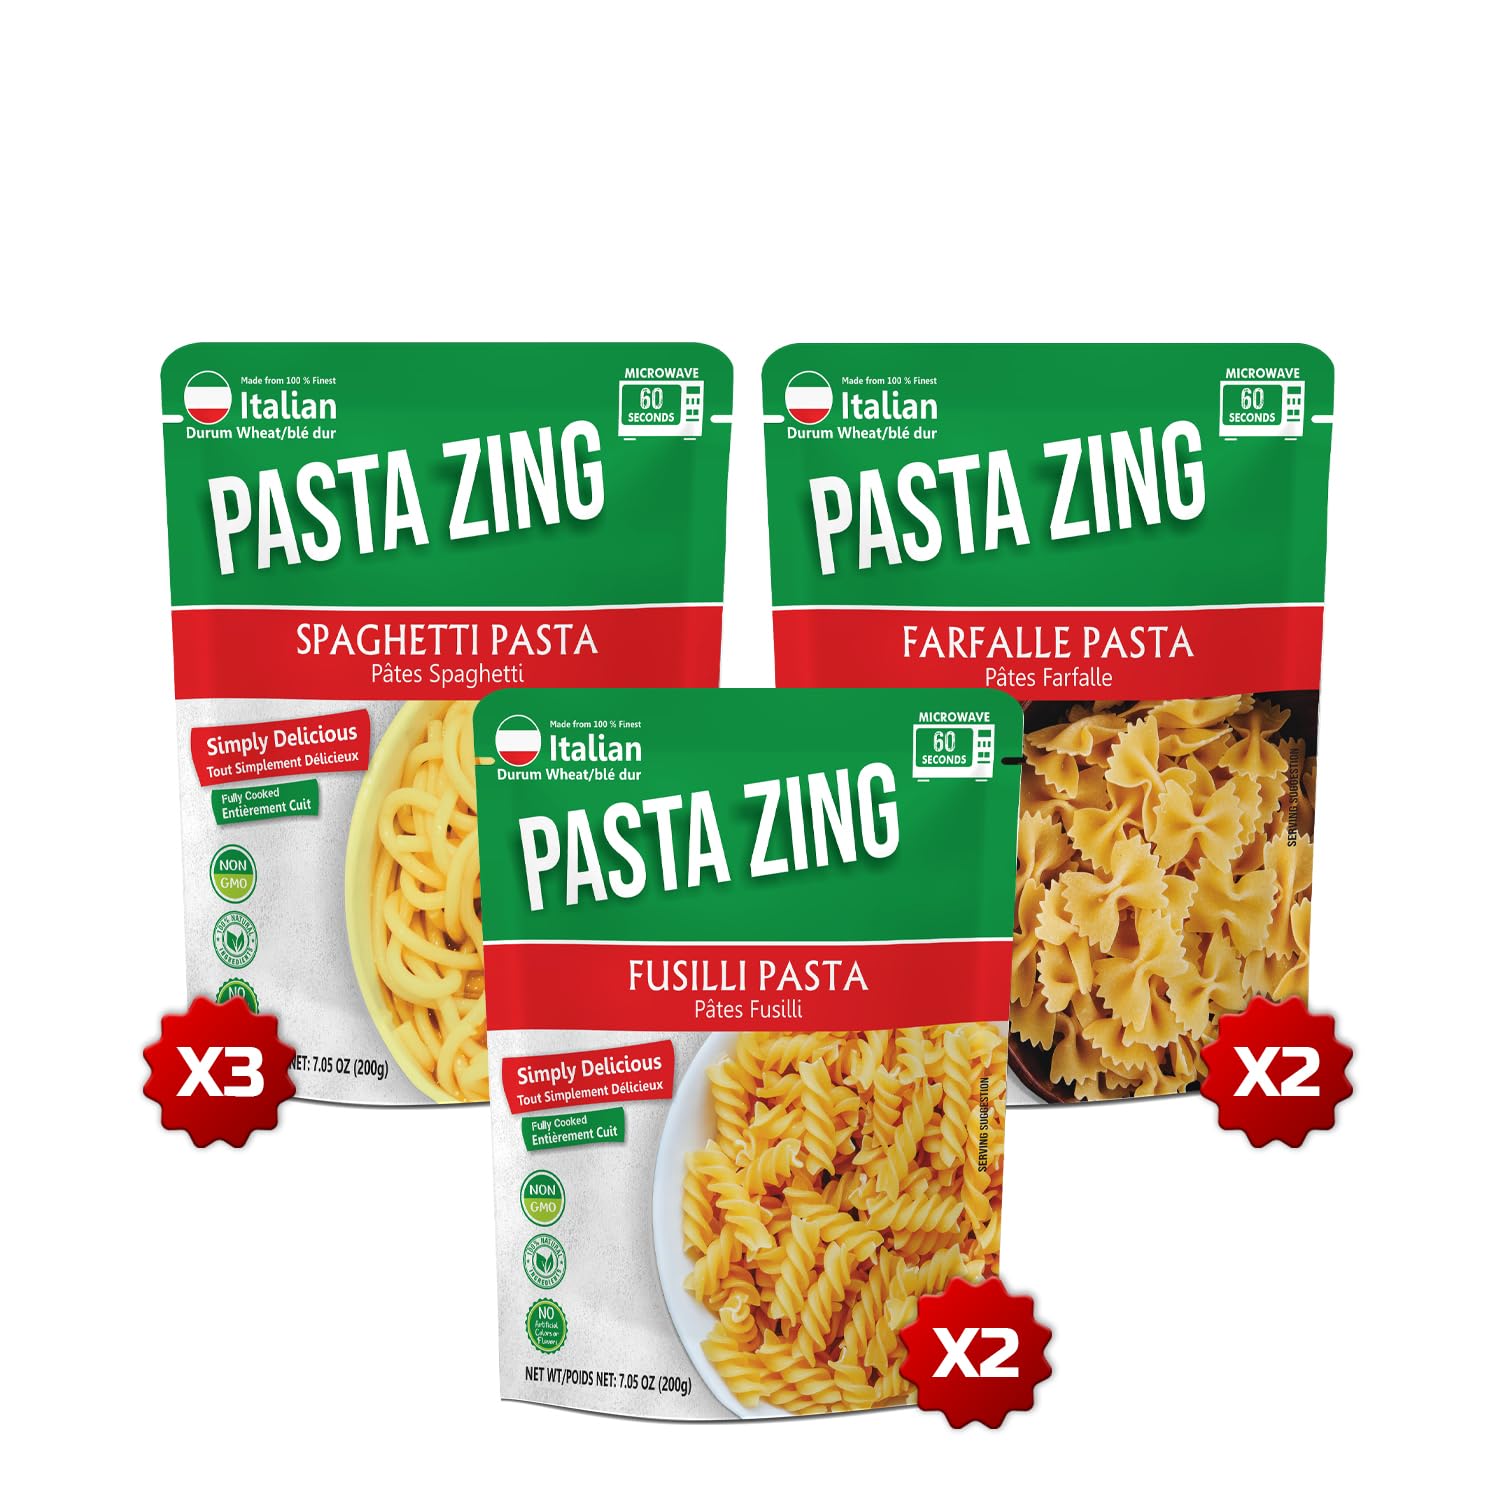 Pasta Zing Variety Pack,Spaghetti Pasta 200 g X 3 + Farfalle 200 g X 2 + Fusilli 200 g X 2, 7 pouces in a Hood & Tray, pack of 7